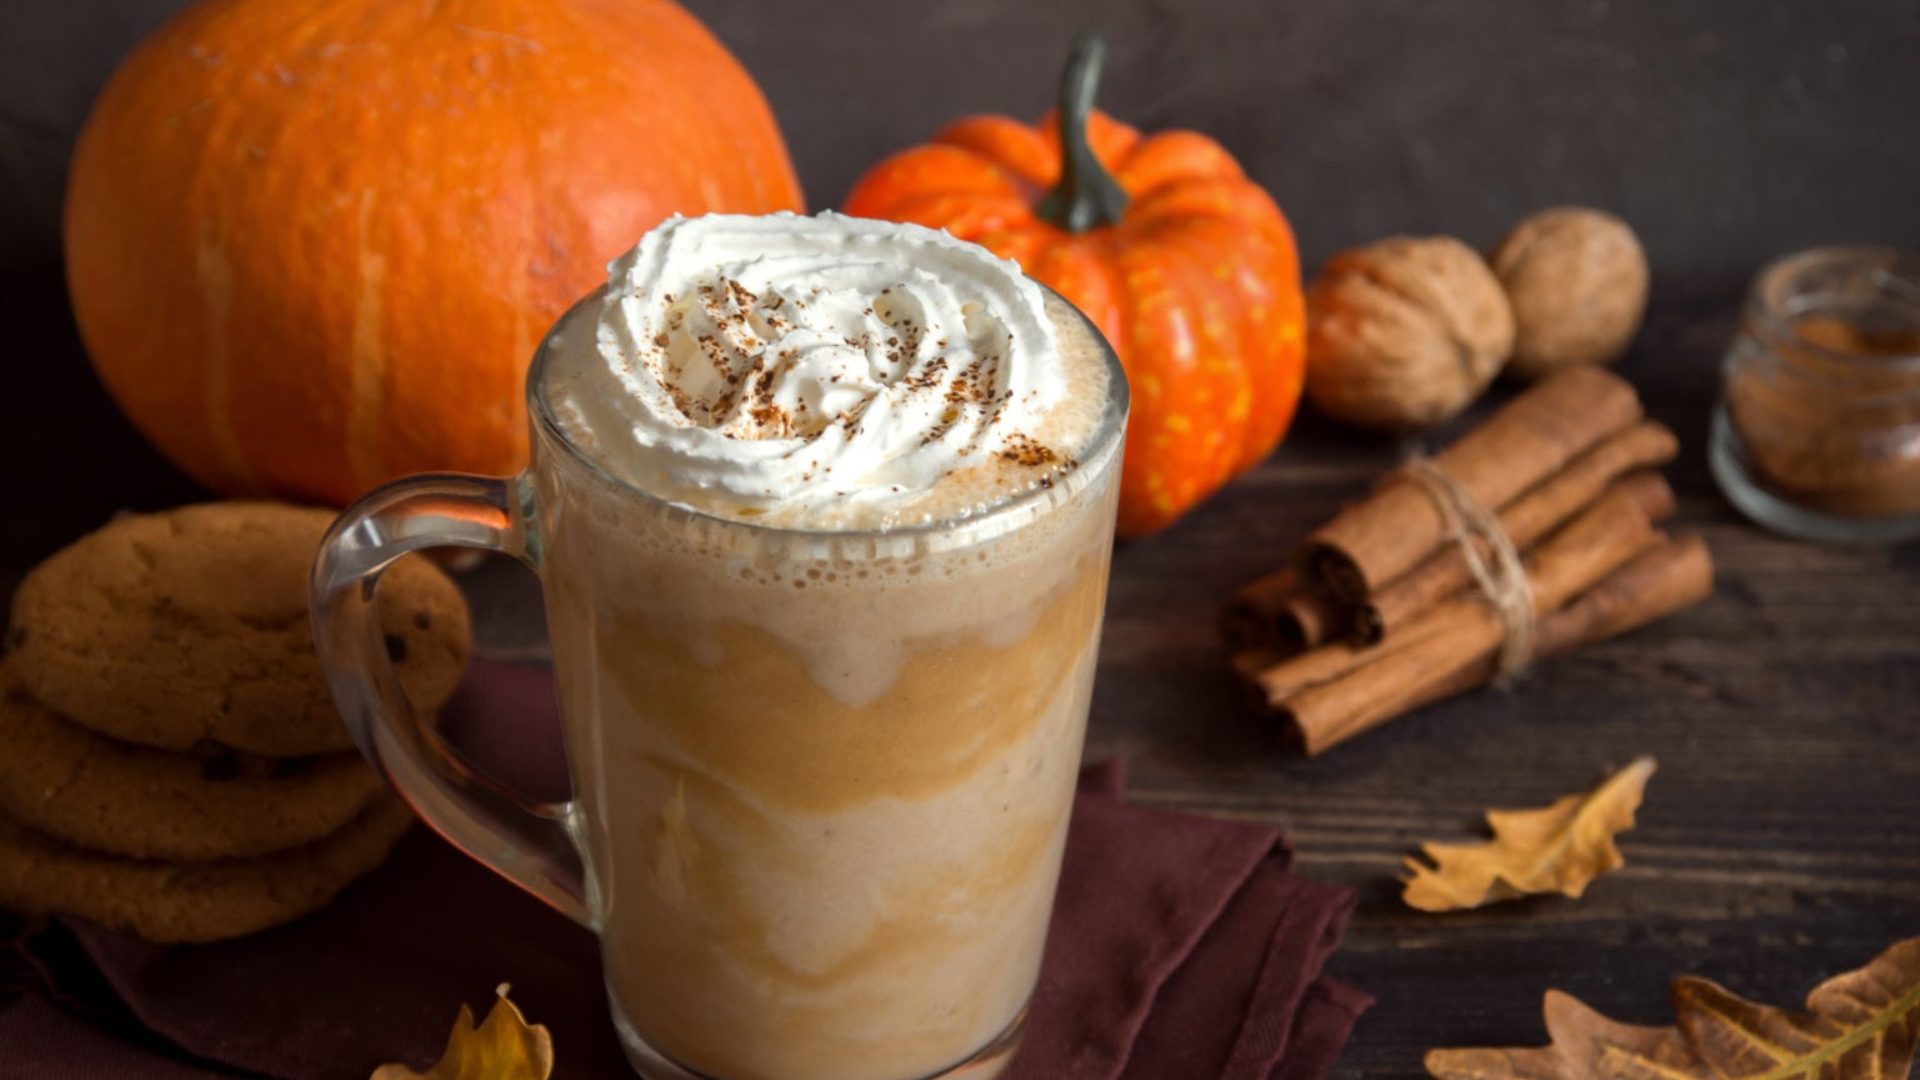 Embrace pumpkin spice season with these drool-worthy recipes